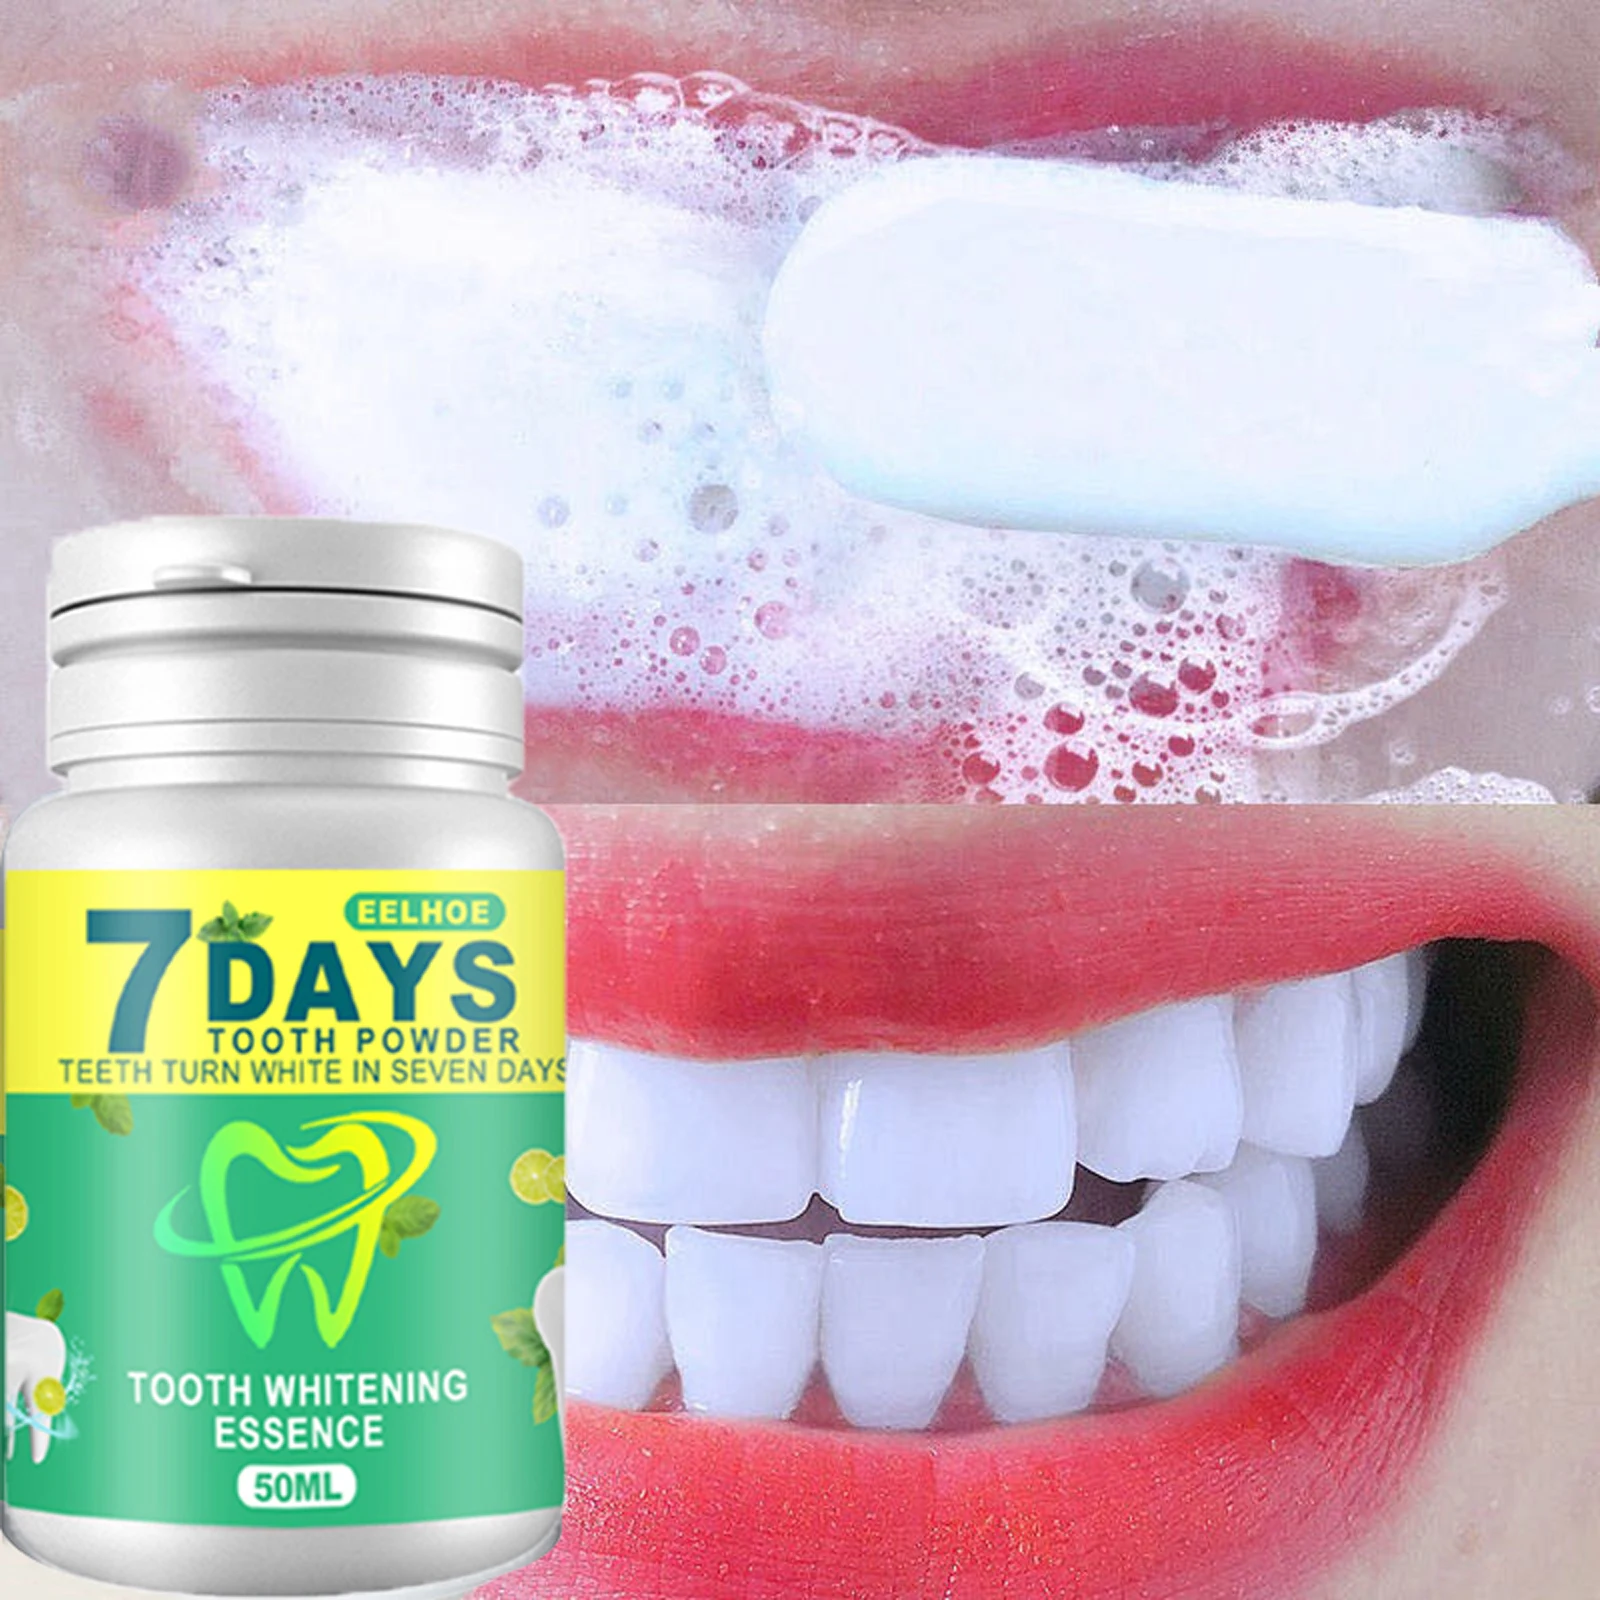 7 Days Teeth Whitening Powder Cleaning Dental Hygiene Removal Plaque Stains Bleaching Yellow Teeth Fresh Breath Dental Products